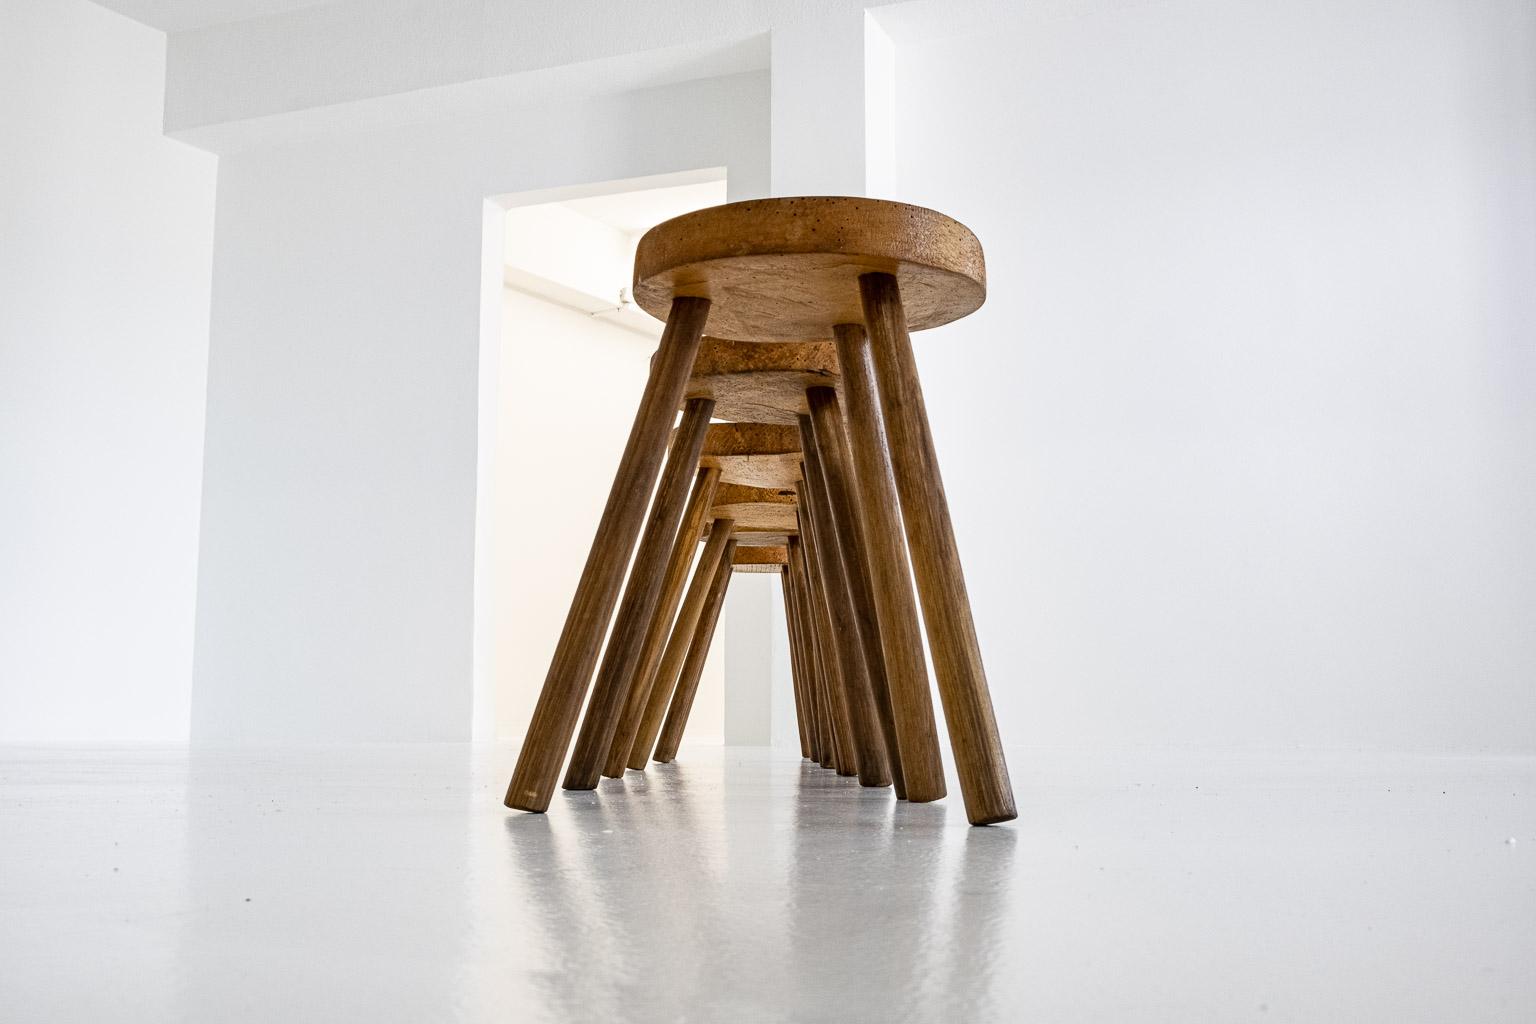 Set of 6, Wooden, Brutalist Tripod Stools or Side Tables, Italy, ca. 1960s For Sale 5